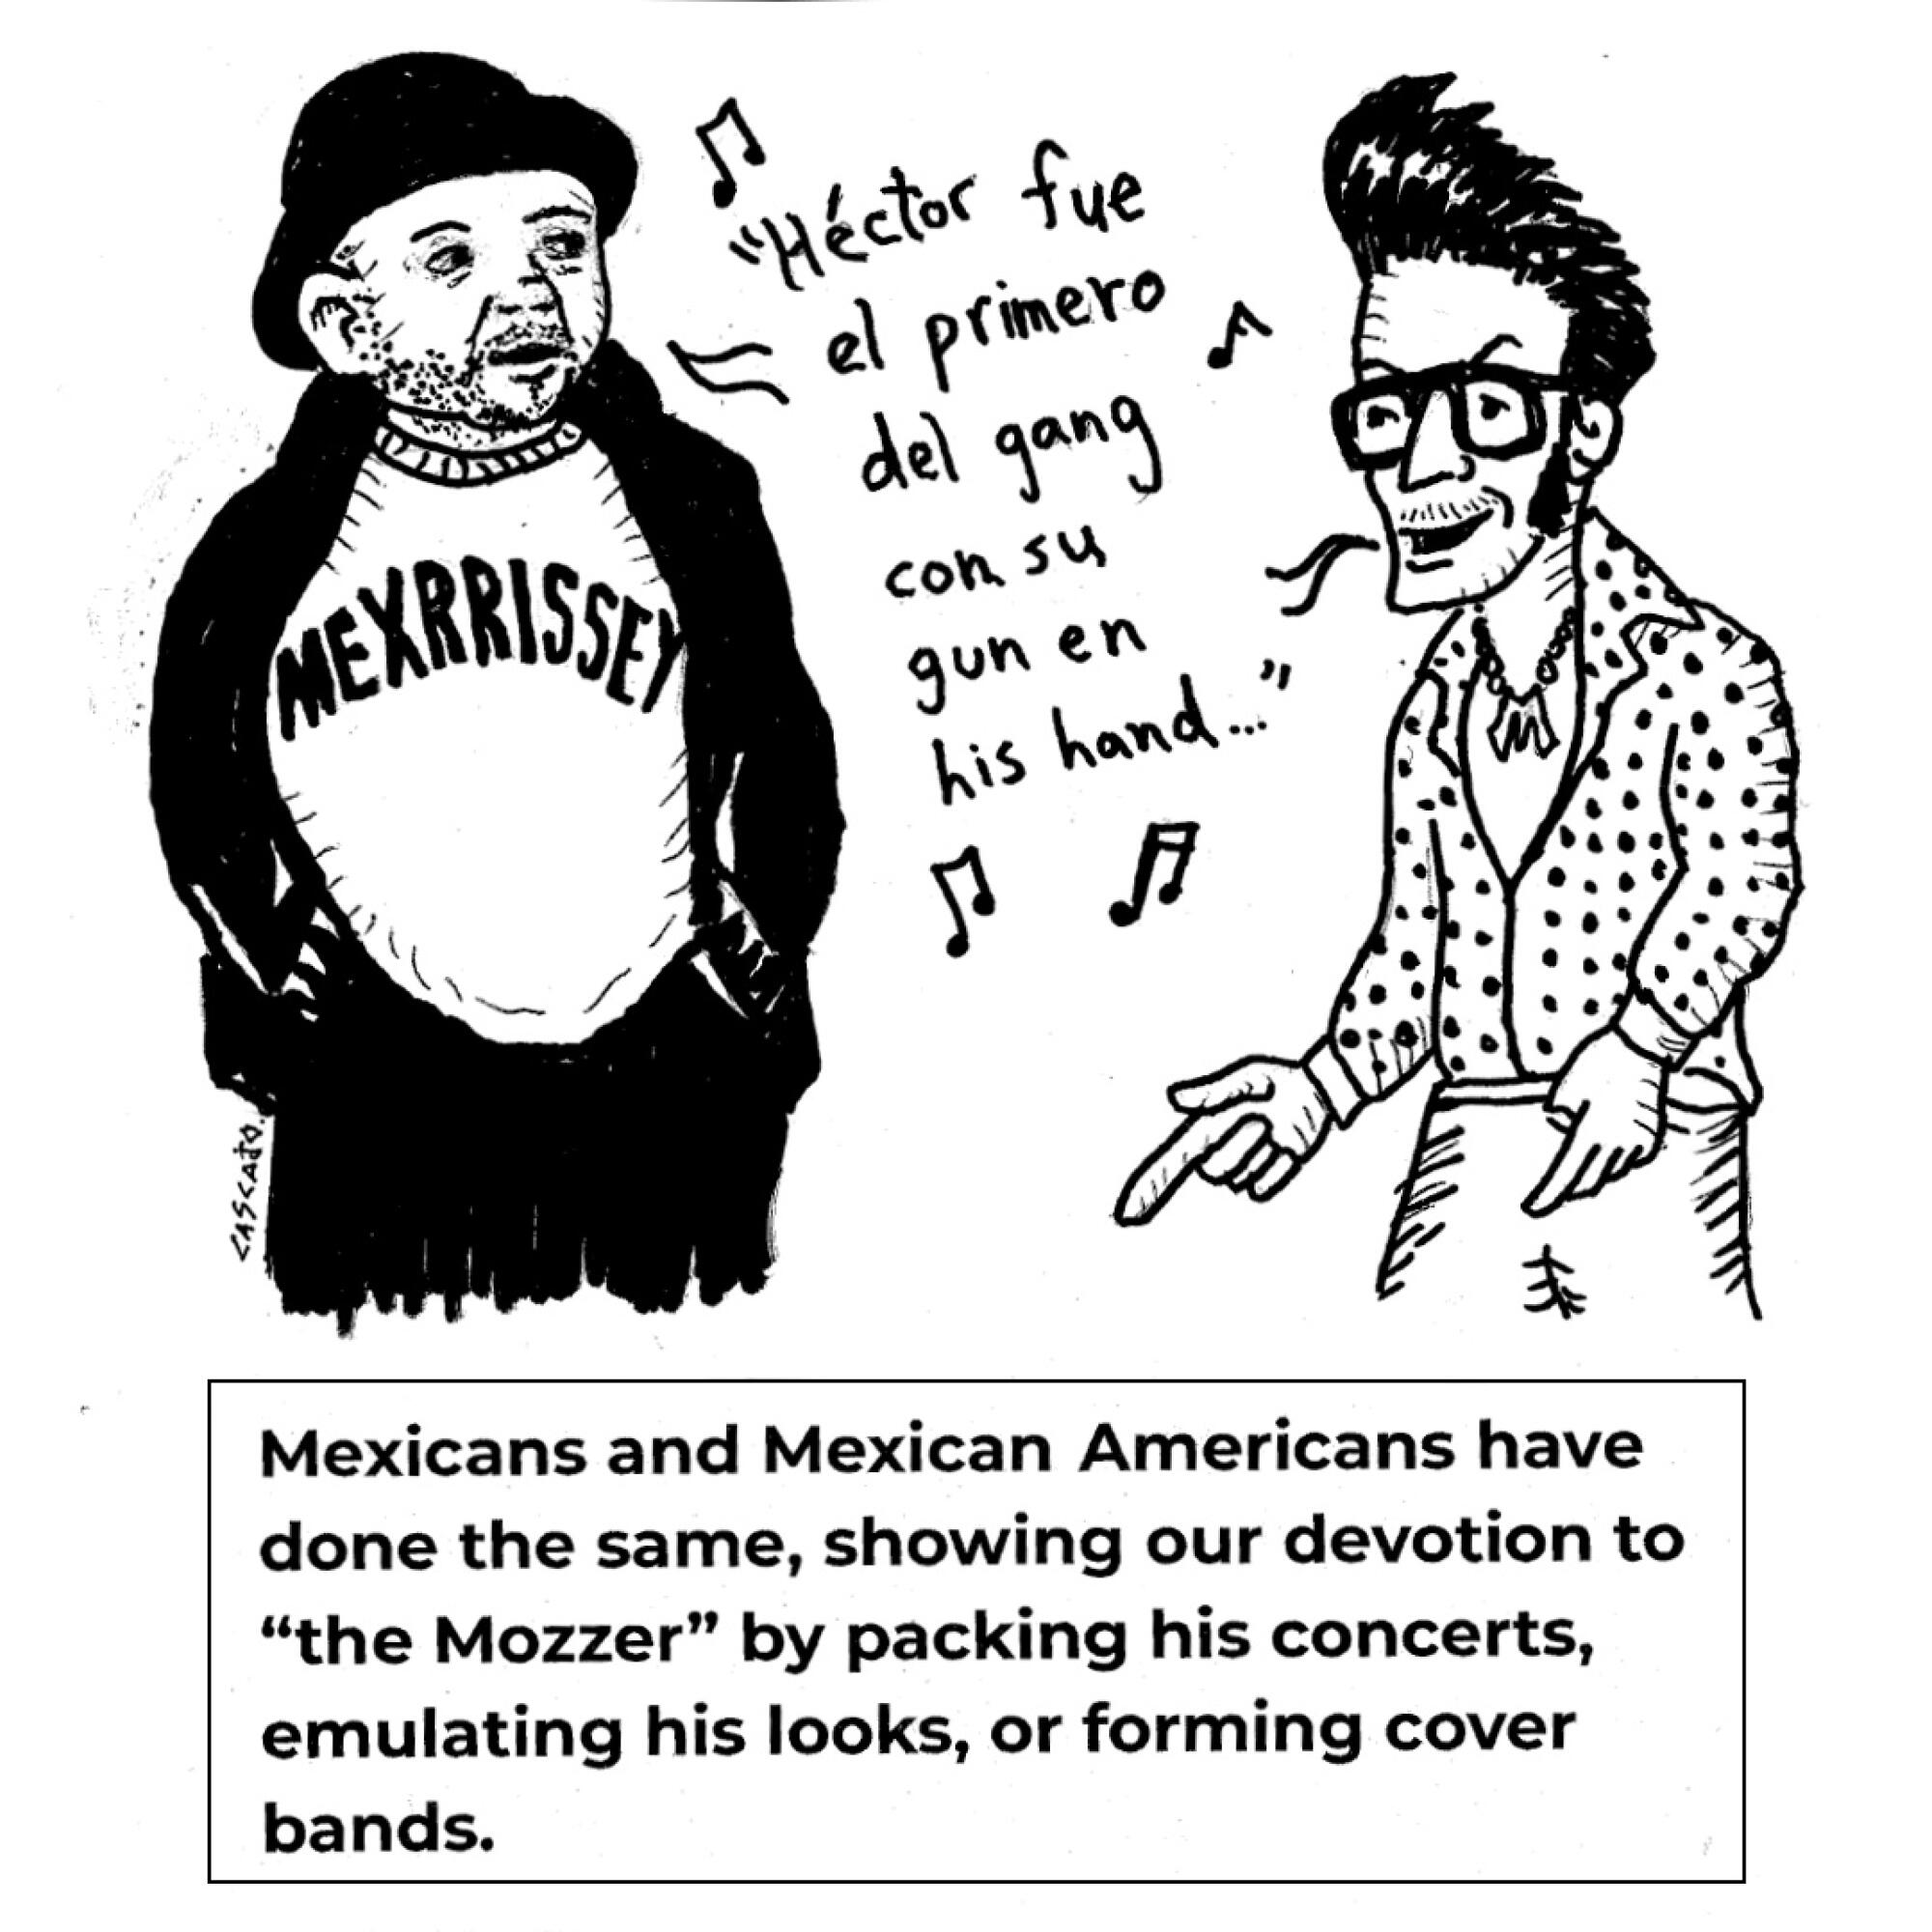 Mexican and Mexican Americans have done the same, showing our devotion to "The mozzer"